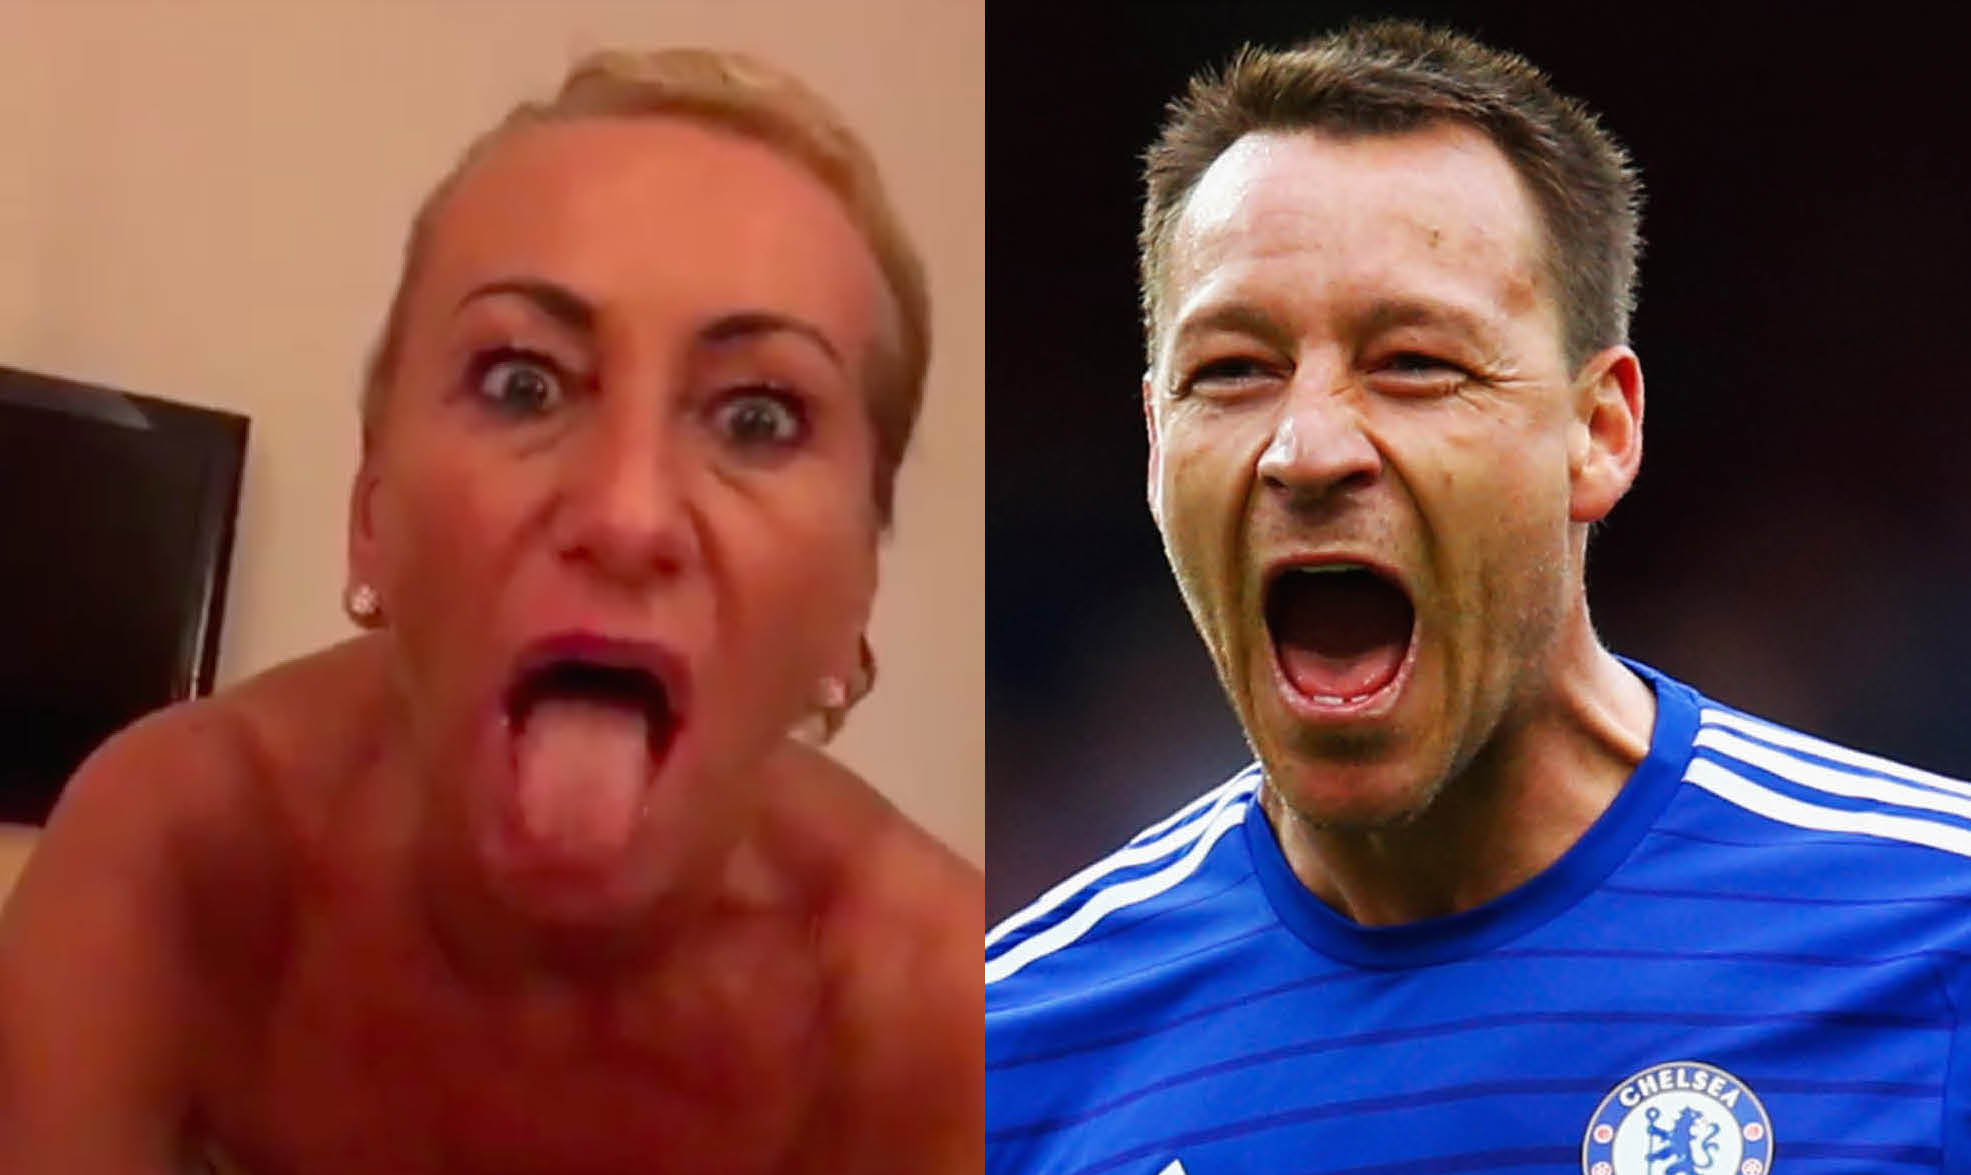 Mumxxxvideo - People Are Claiming This Is A Sex Video Of John Terry's Mum (VIDEO ...